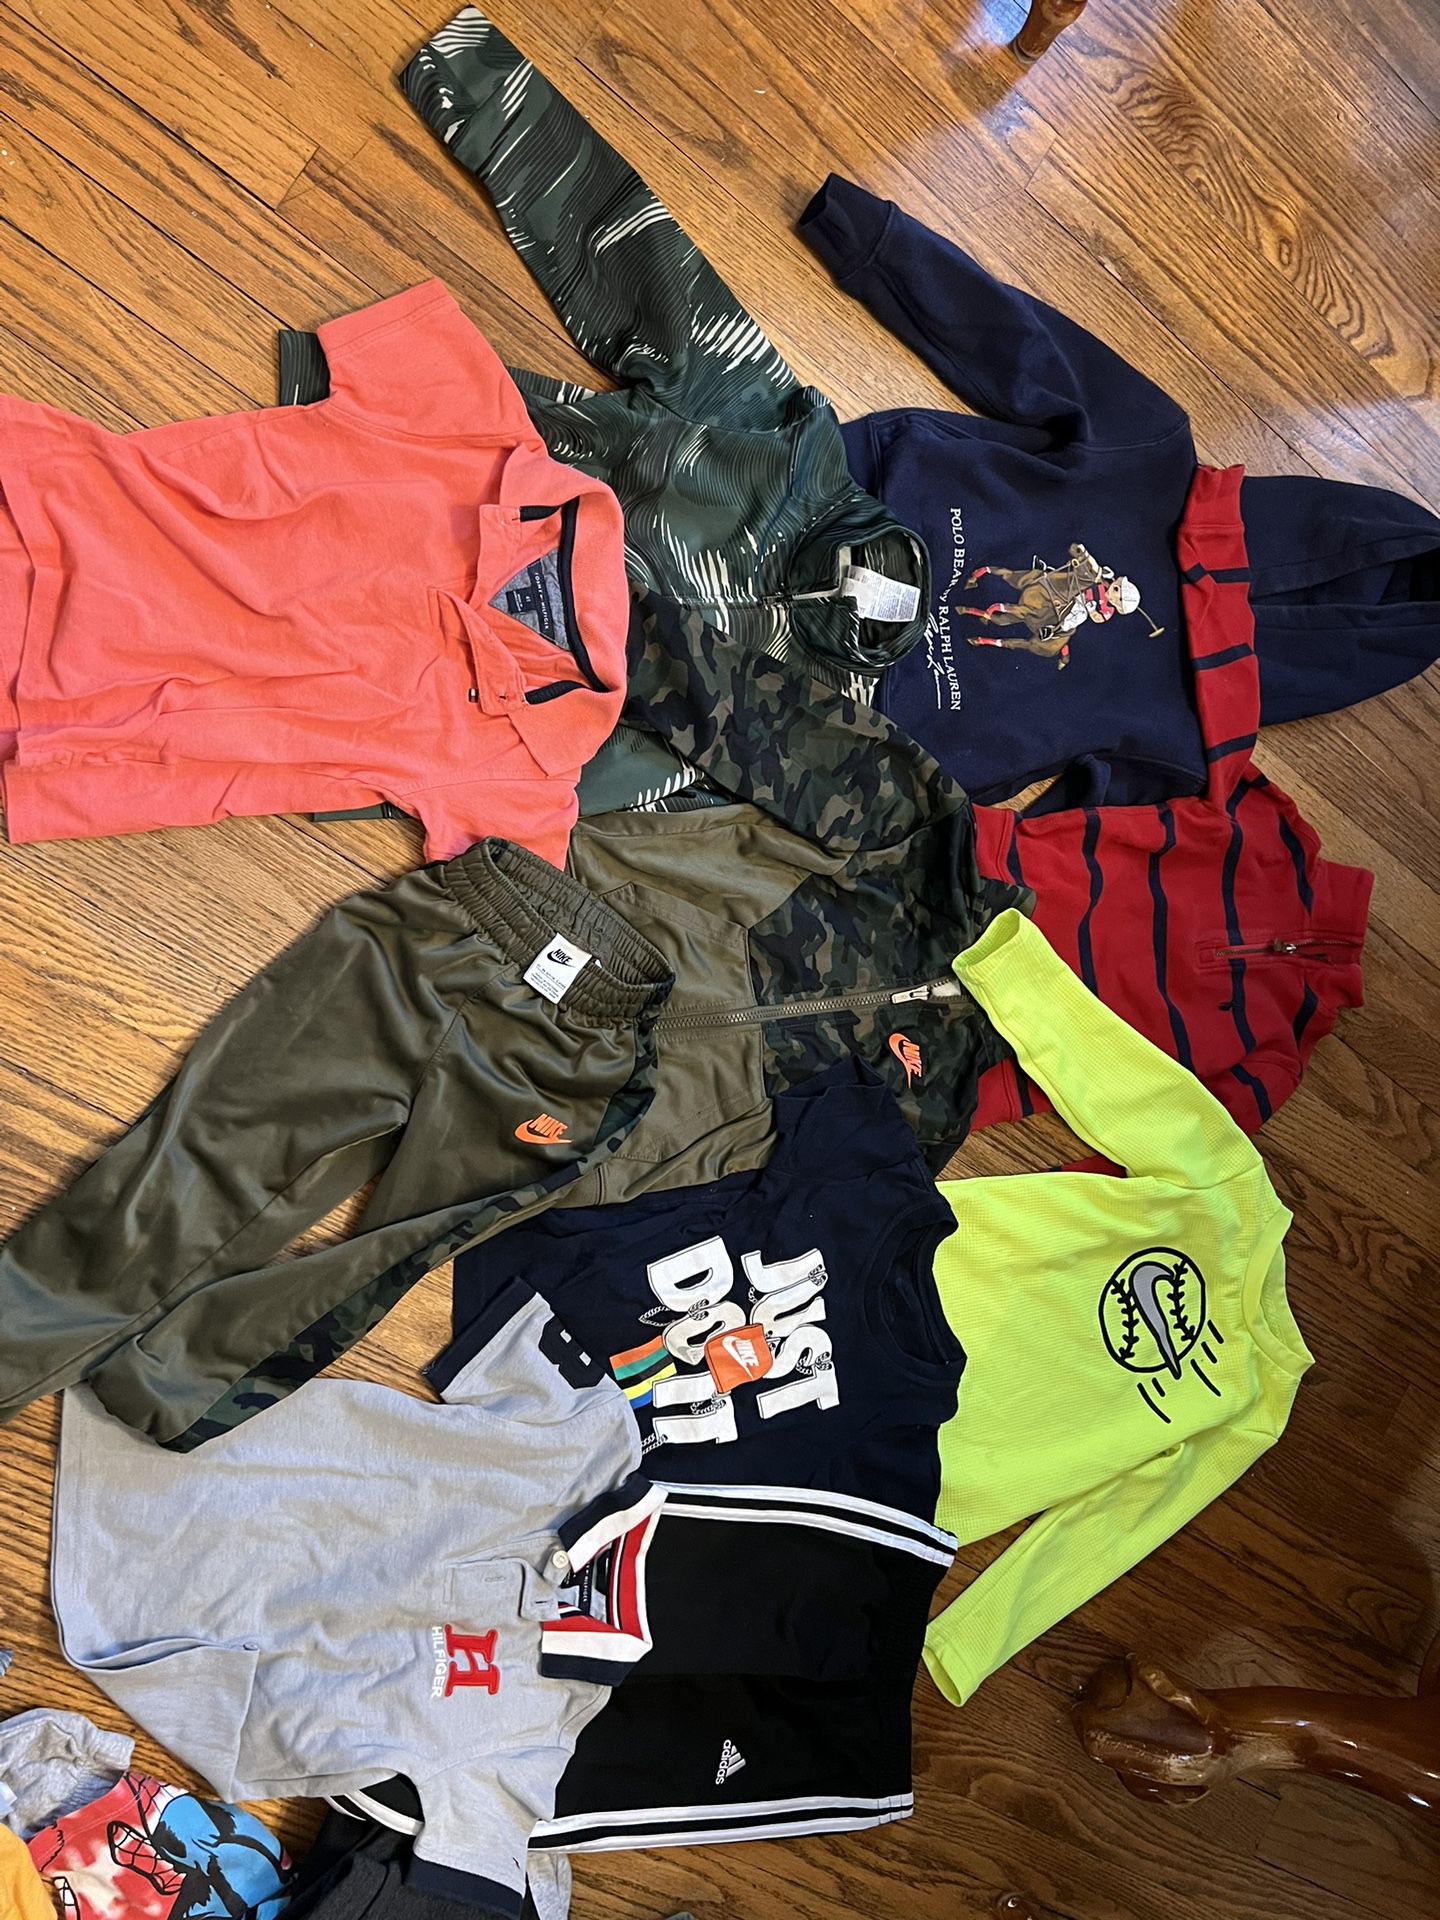 Polo, Nike, Adidas, Tommy Hilfiger and more Toddler Clothing All Size 4t or Size 4